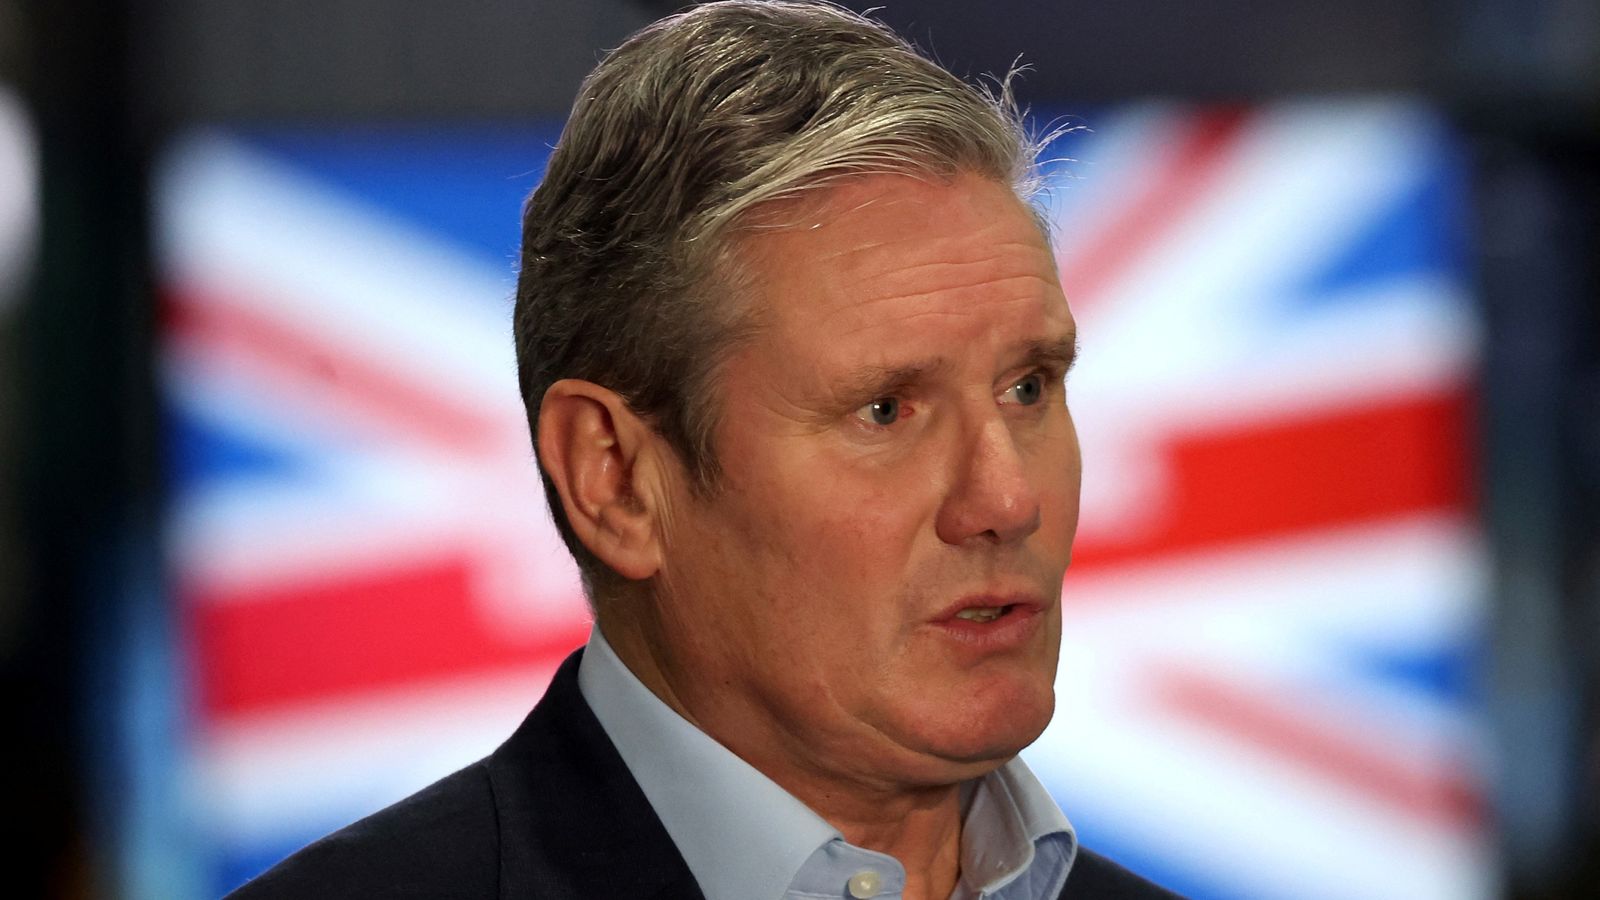 He might not say it publicly, but Sir Keir Starmer thinks power is coming his way